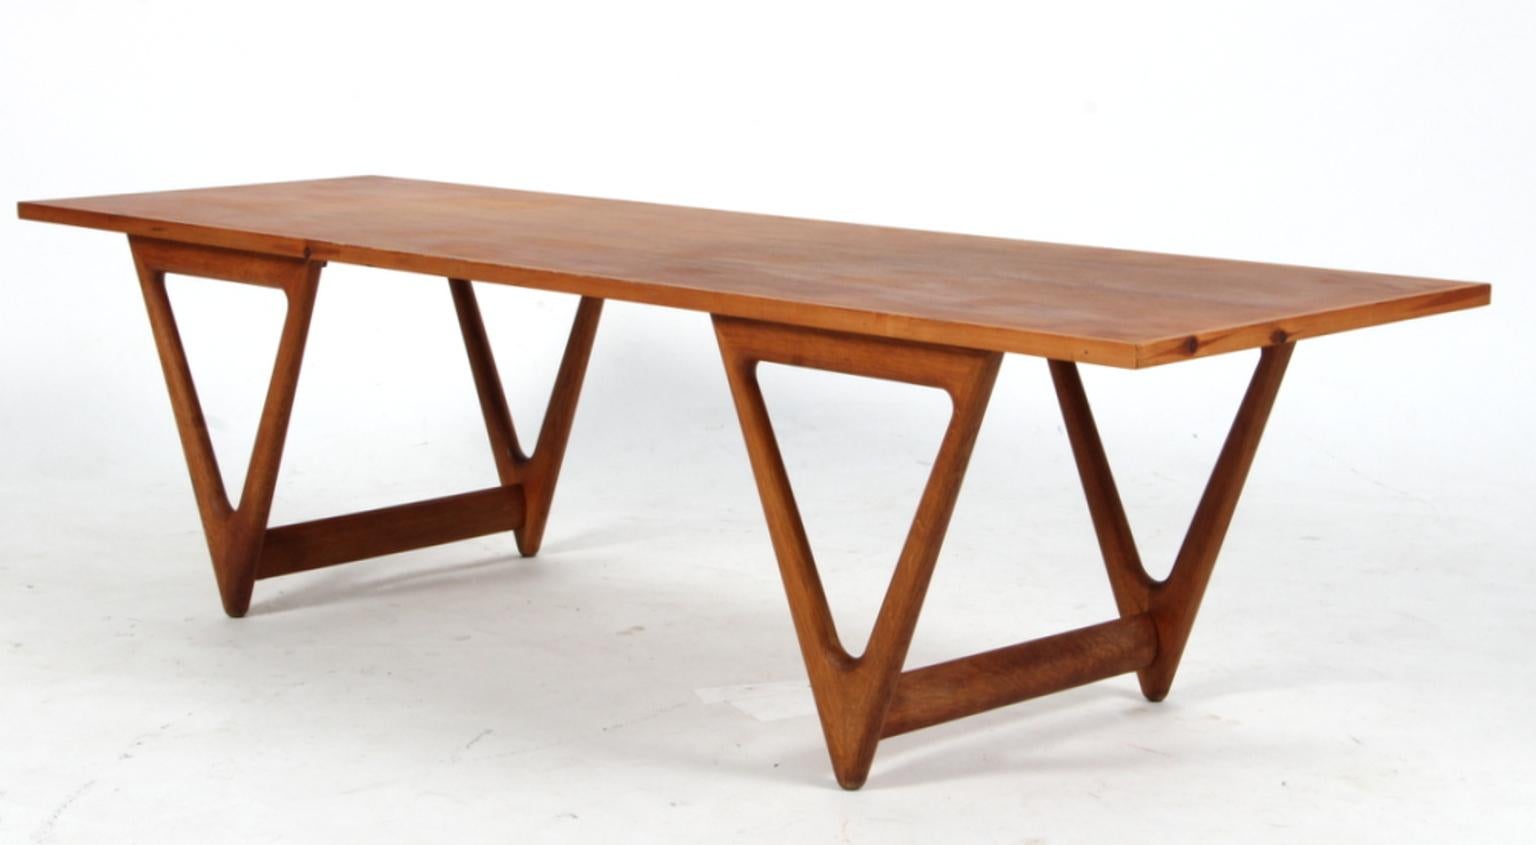 Kurt Østervig coffee table with teak plate with frame of oregon pine.

V sculpted legs in solid oak.

Made by Jason Møbler in the 1960s.

Can easy be disassembled for easy shipping.